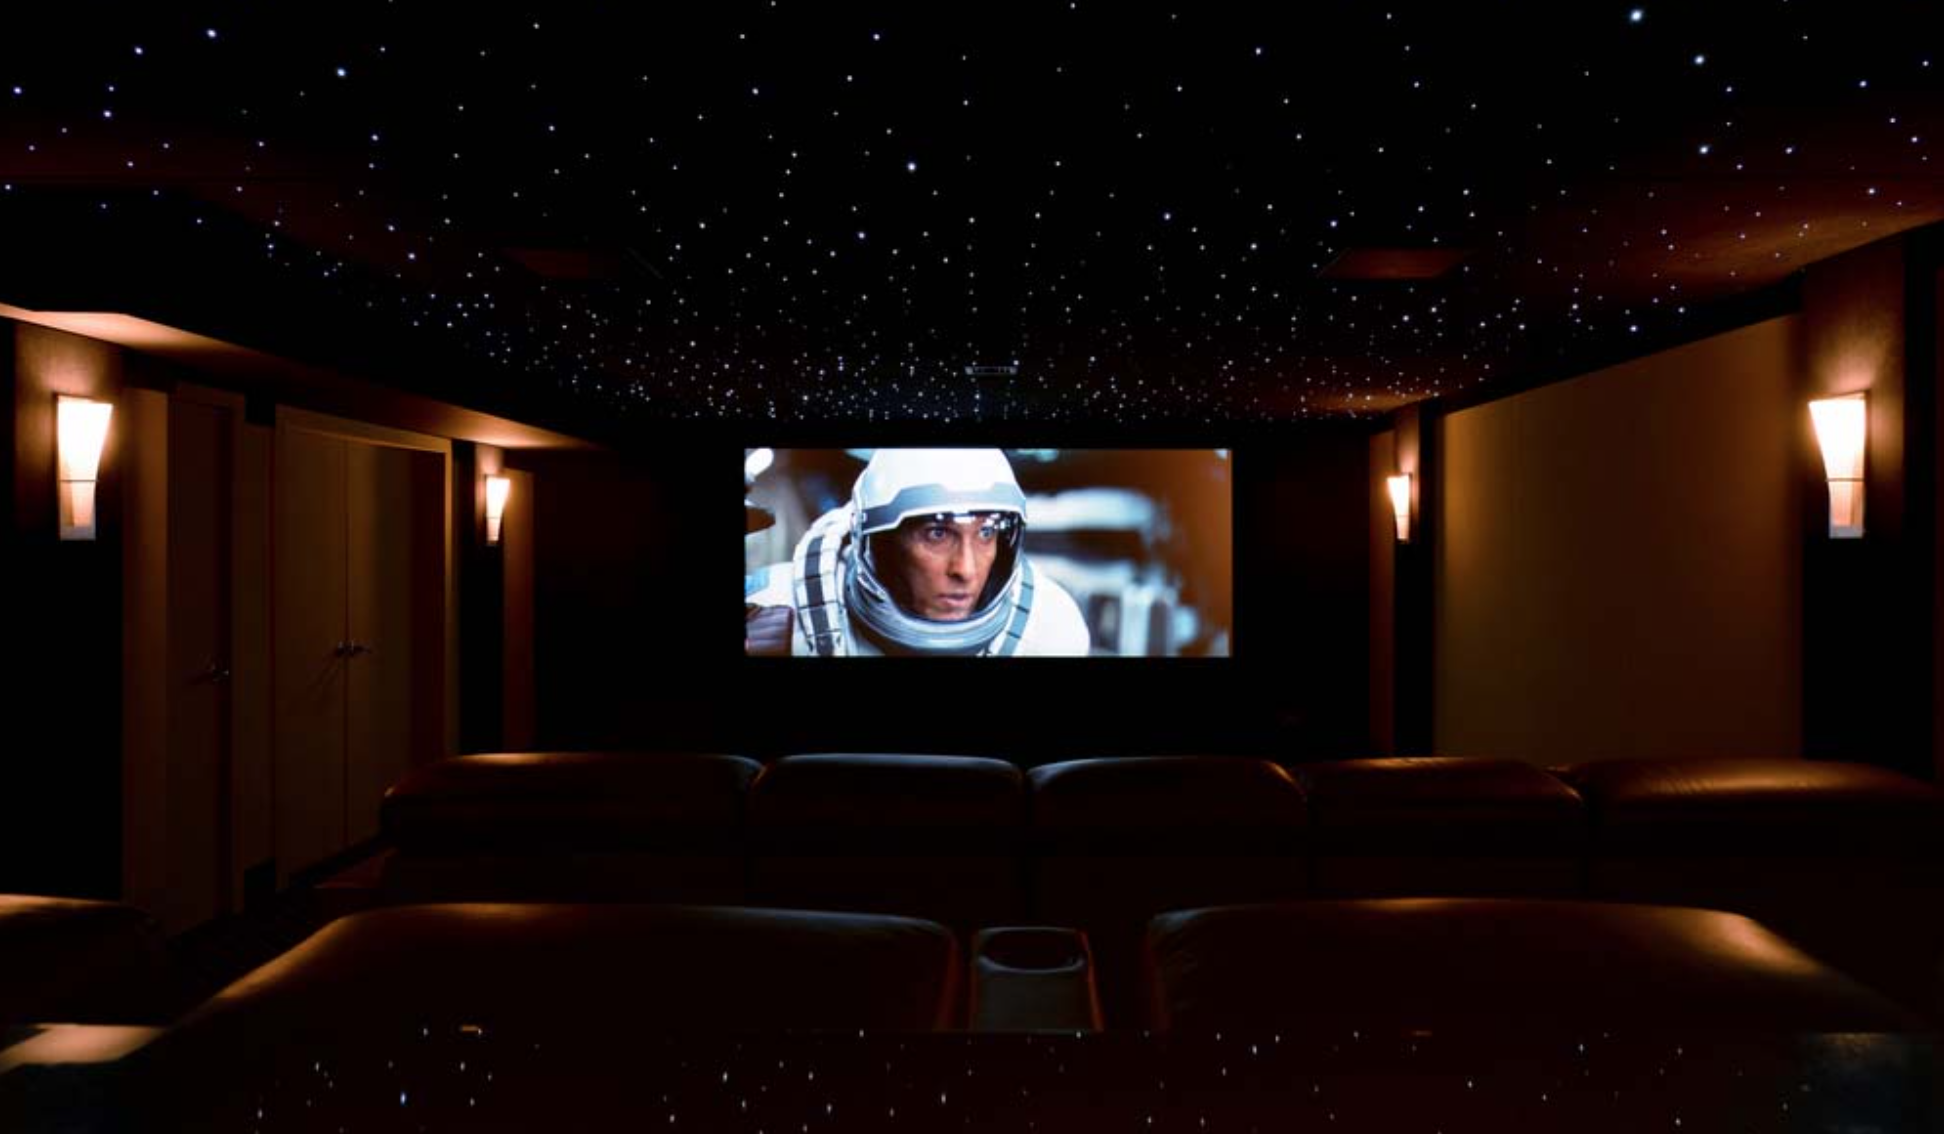 Staying at home? Tips to set up epic home cinema during the corona vir